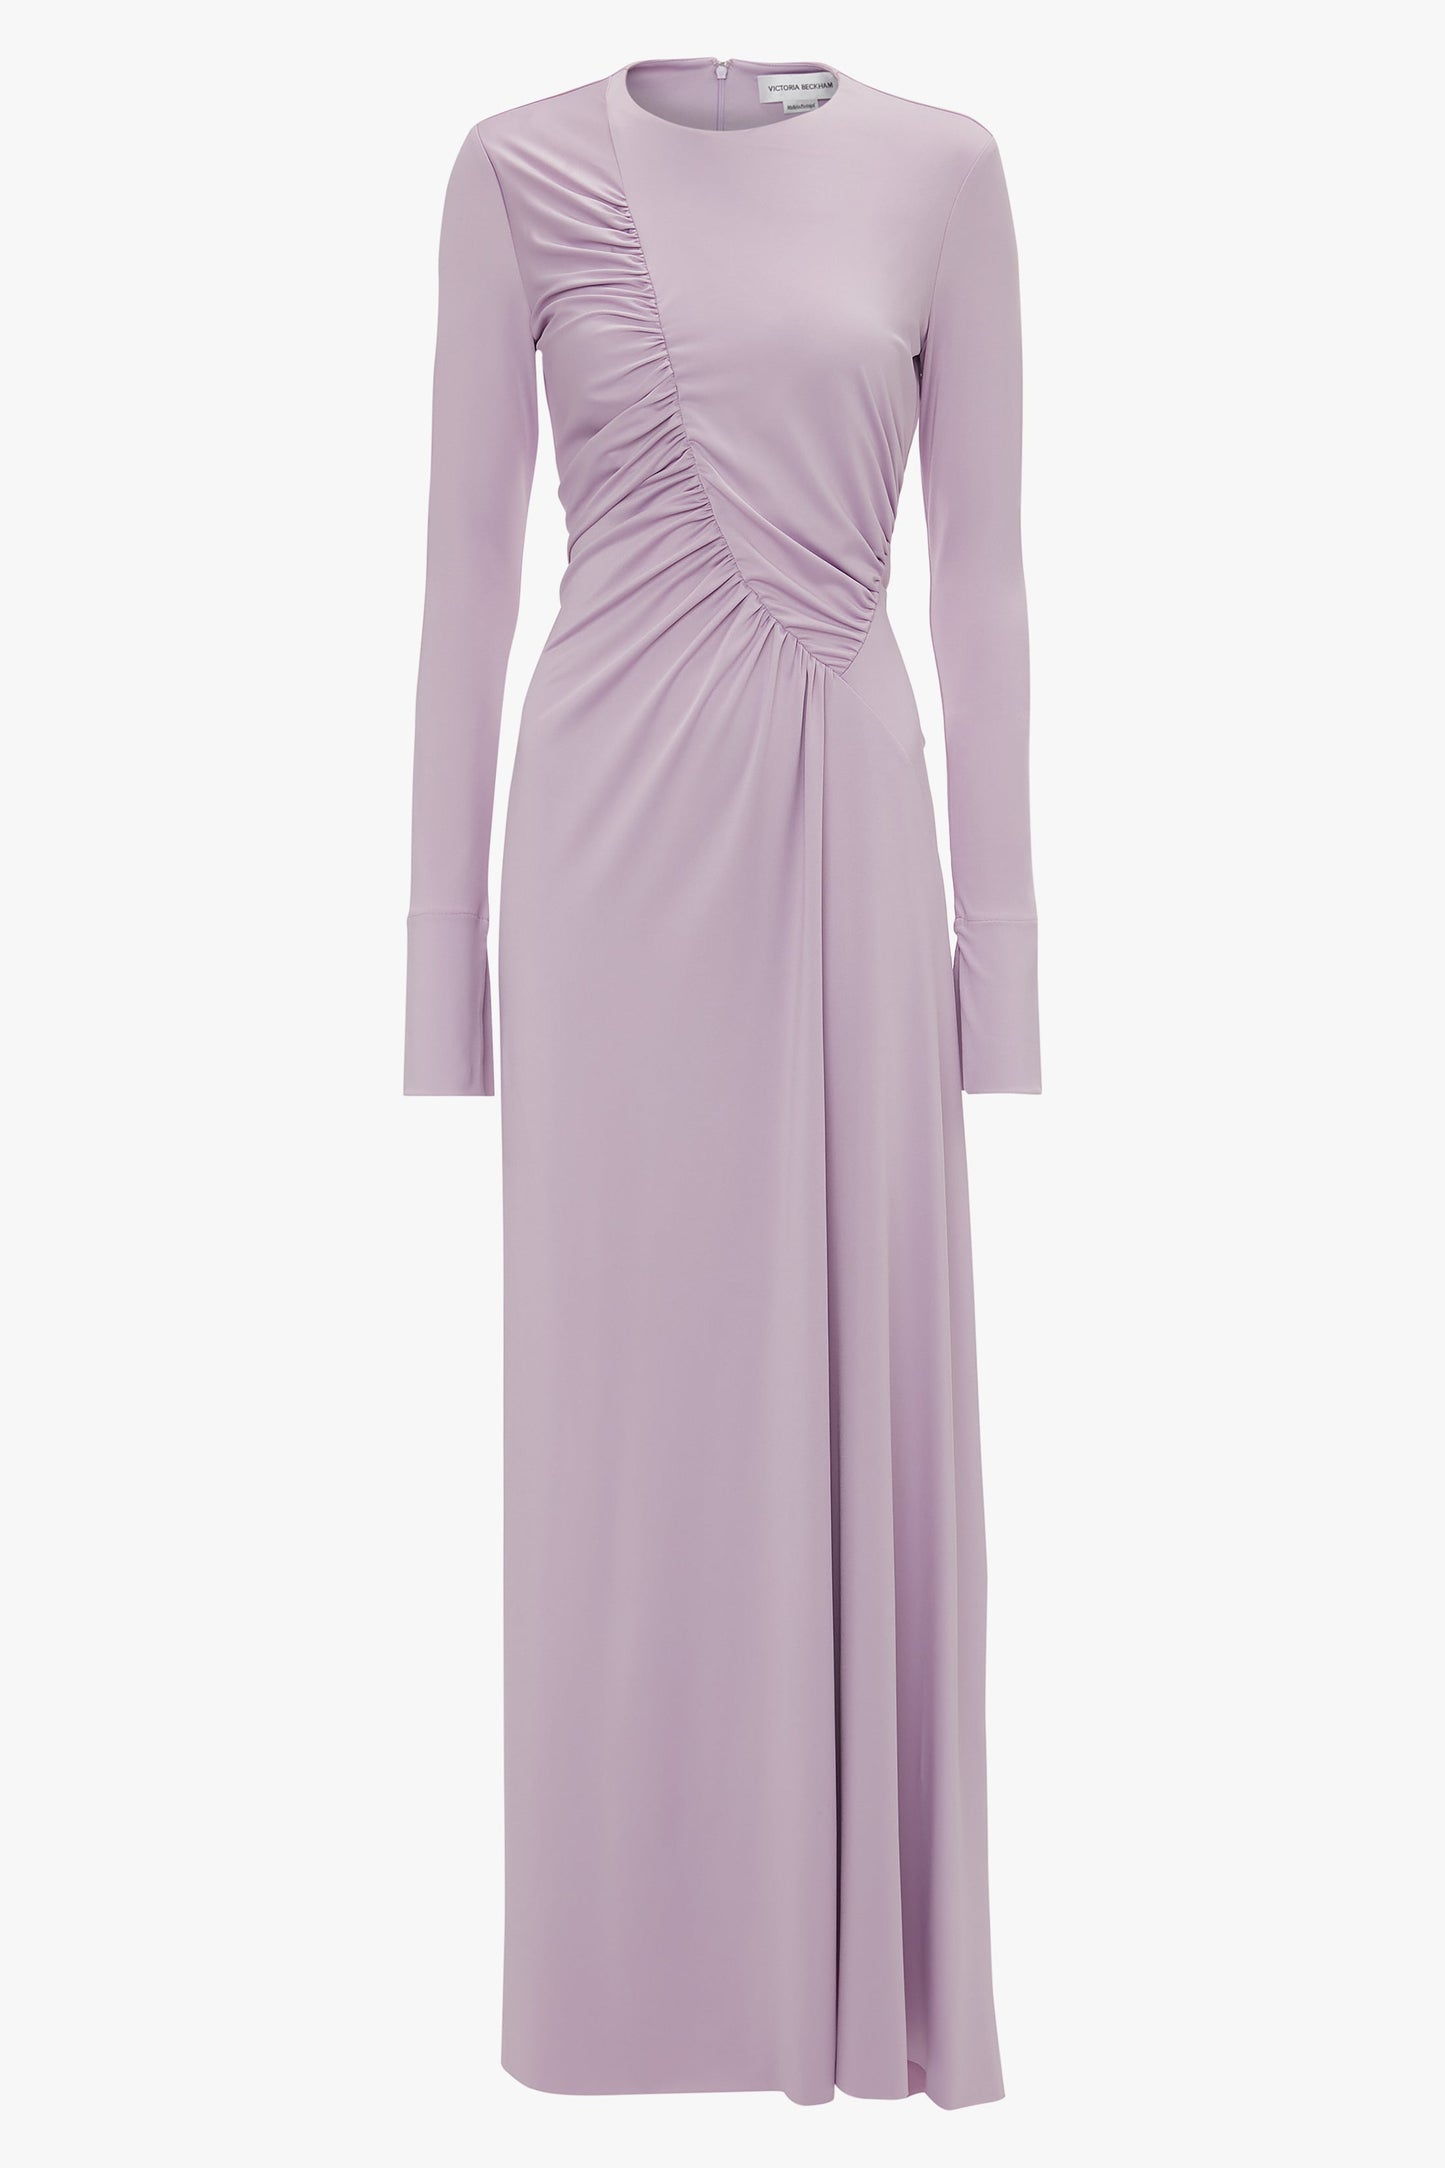 A long-sleeved, lavender Ruched Detail Floor-Length Gown In Petunia by Victoria Beckham crafted from stretch jersey, featuring asymmetrical ruching across the bodice and a slit at the hem for an understated glamour.